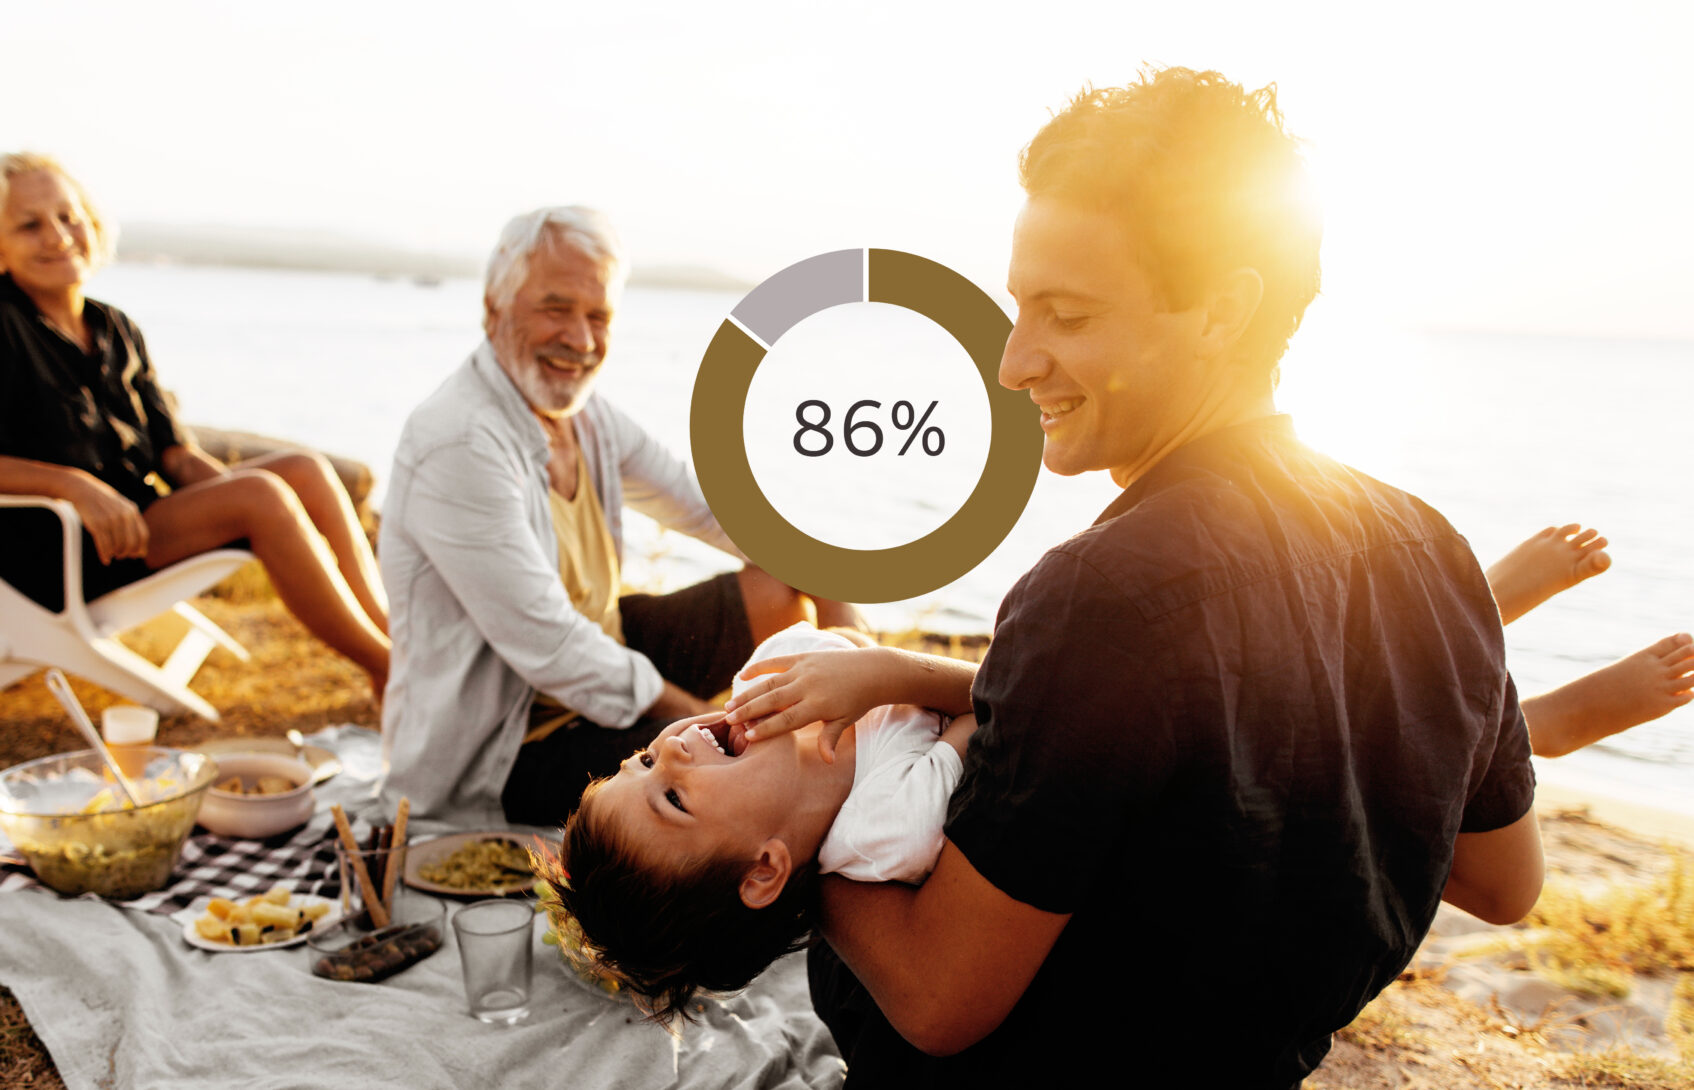 An image shows three generations smiling together on the beach next to a graphic showing 86%, which is the percentage of Rising Gen respondents to our survey who say the most important thing they will inherit from their parents is their values, not their money.